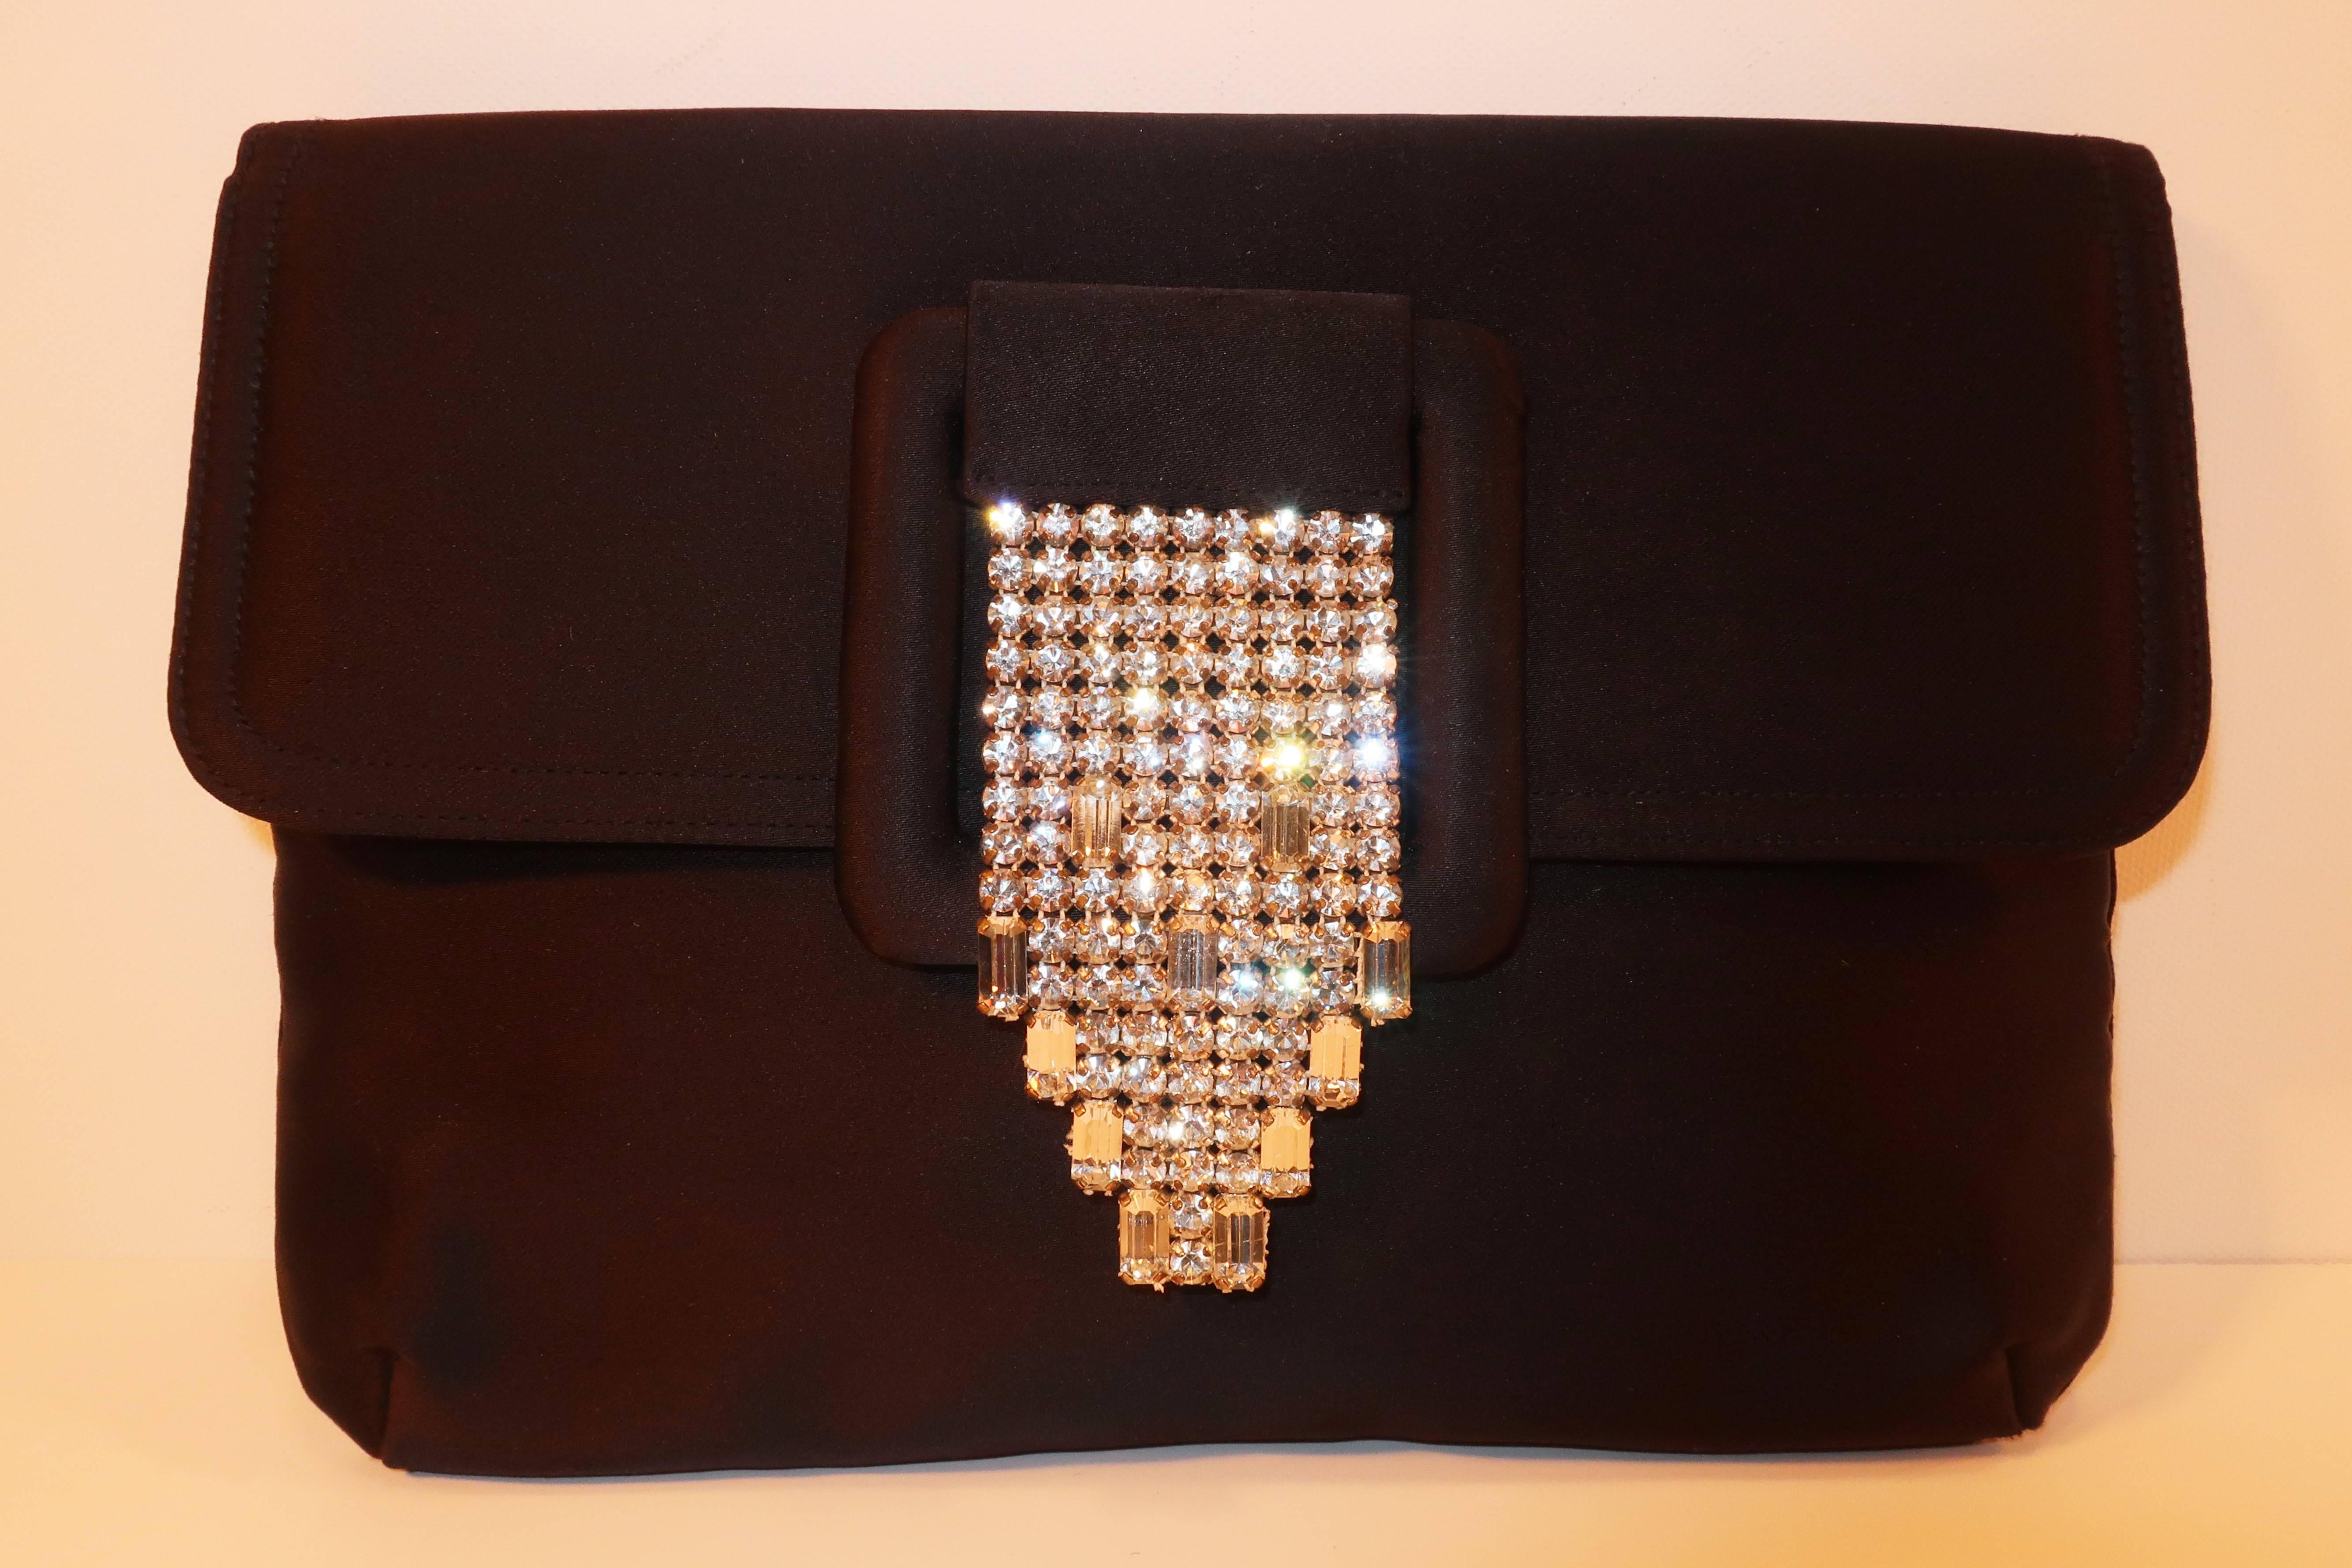 This Art Deco style clutch handbag from Morris Moskowitz will take a simple evening look from functional to fabulous.  The envelope shaped black peau de soie silhouette is accented with a sparkly rhinestone waterfall buckle with a snap closure.  The